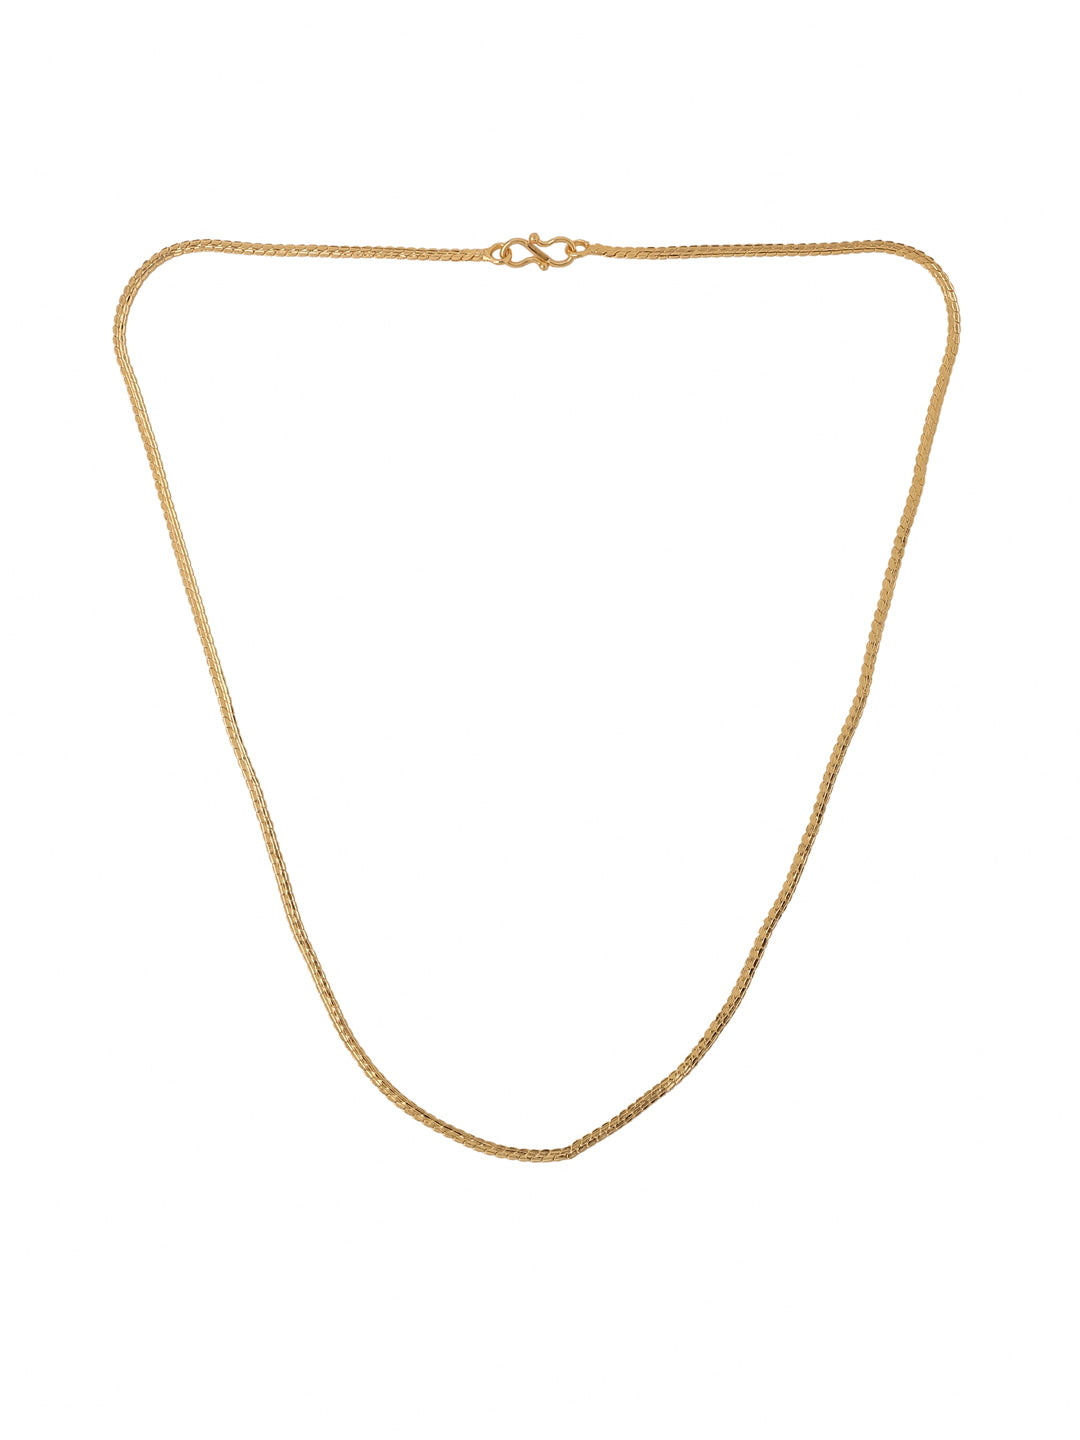 Royal Links Gold Plated Chain For Men-Viraasi